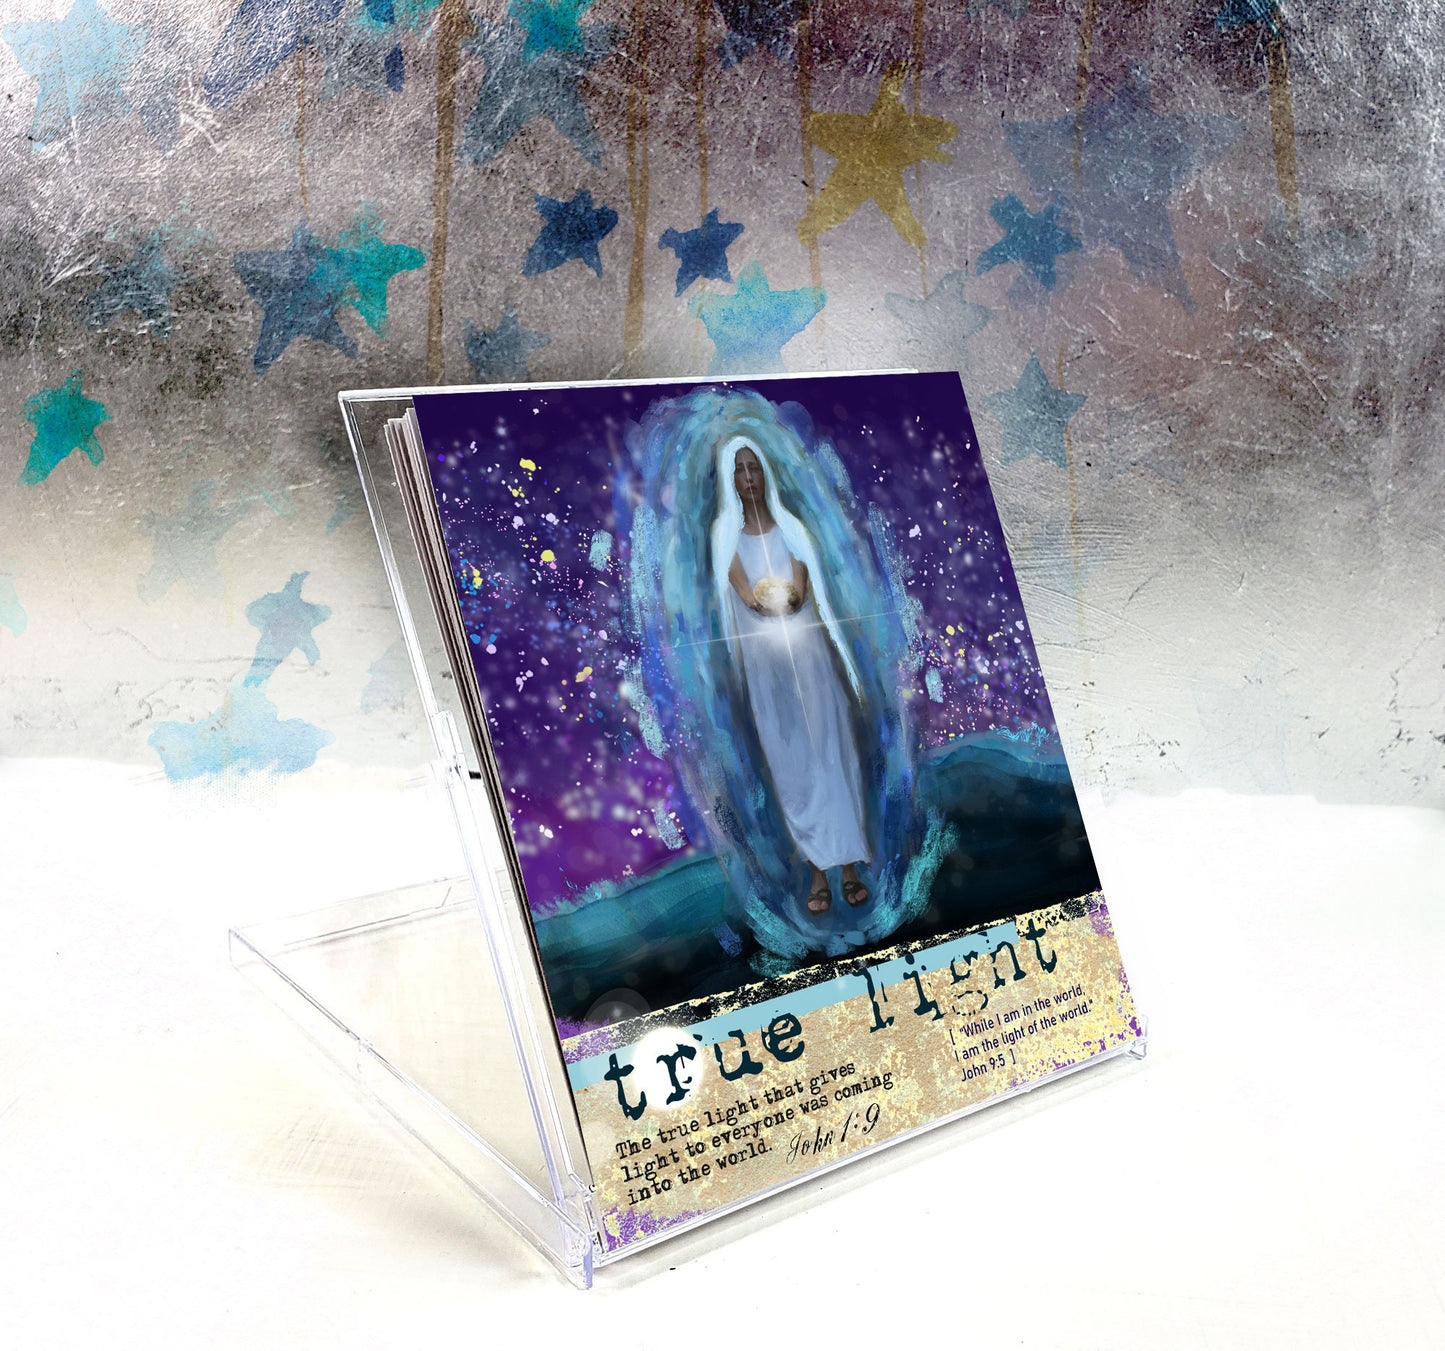 Born in my Heart - Advent 24 large card set with stand